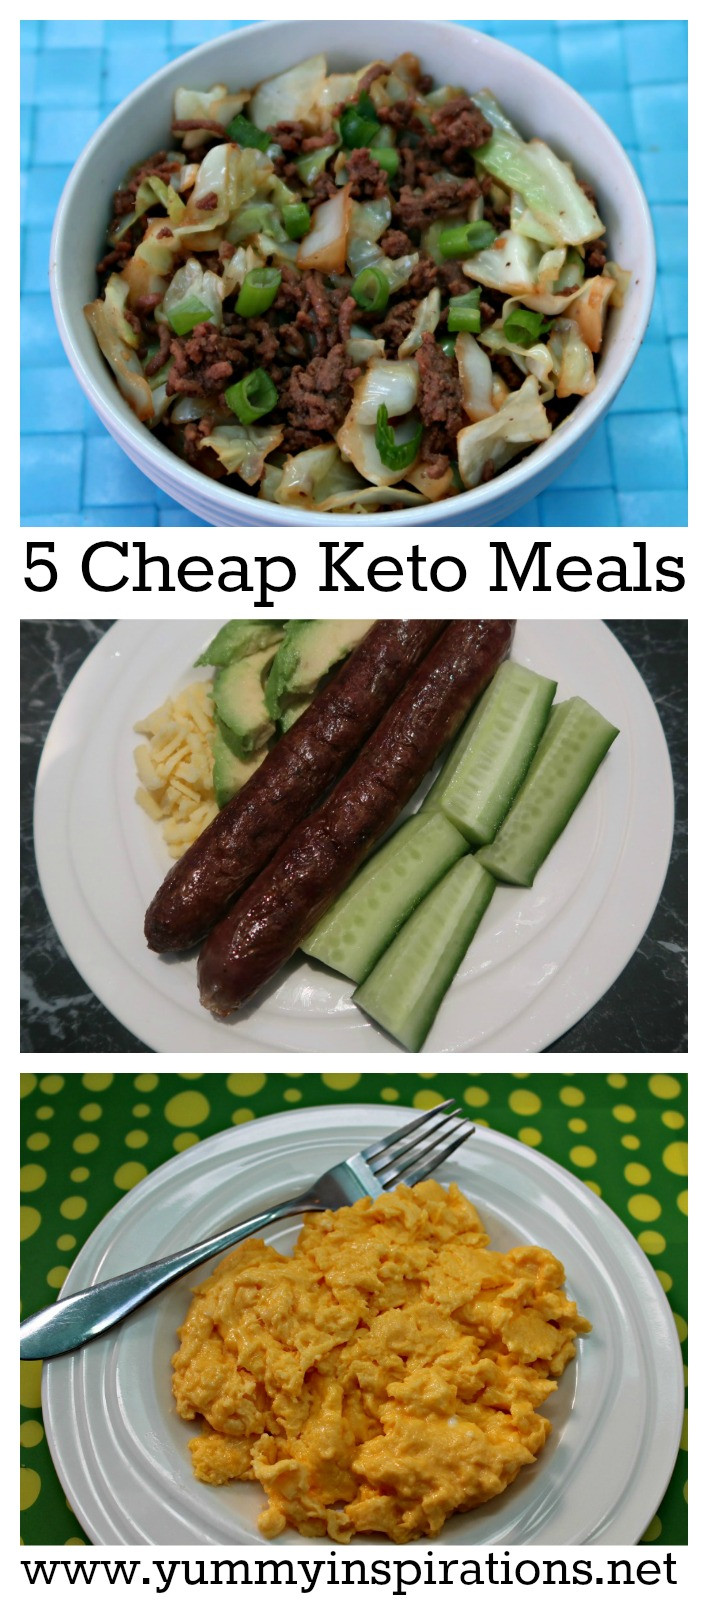 Healthy Keto Meals
 5 Cheap Keto Meals Low Carb Keto Diet Foods A Bud